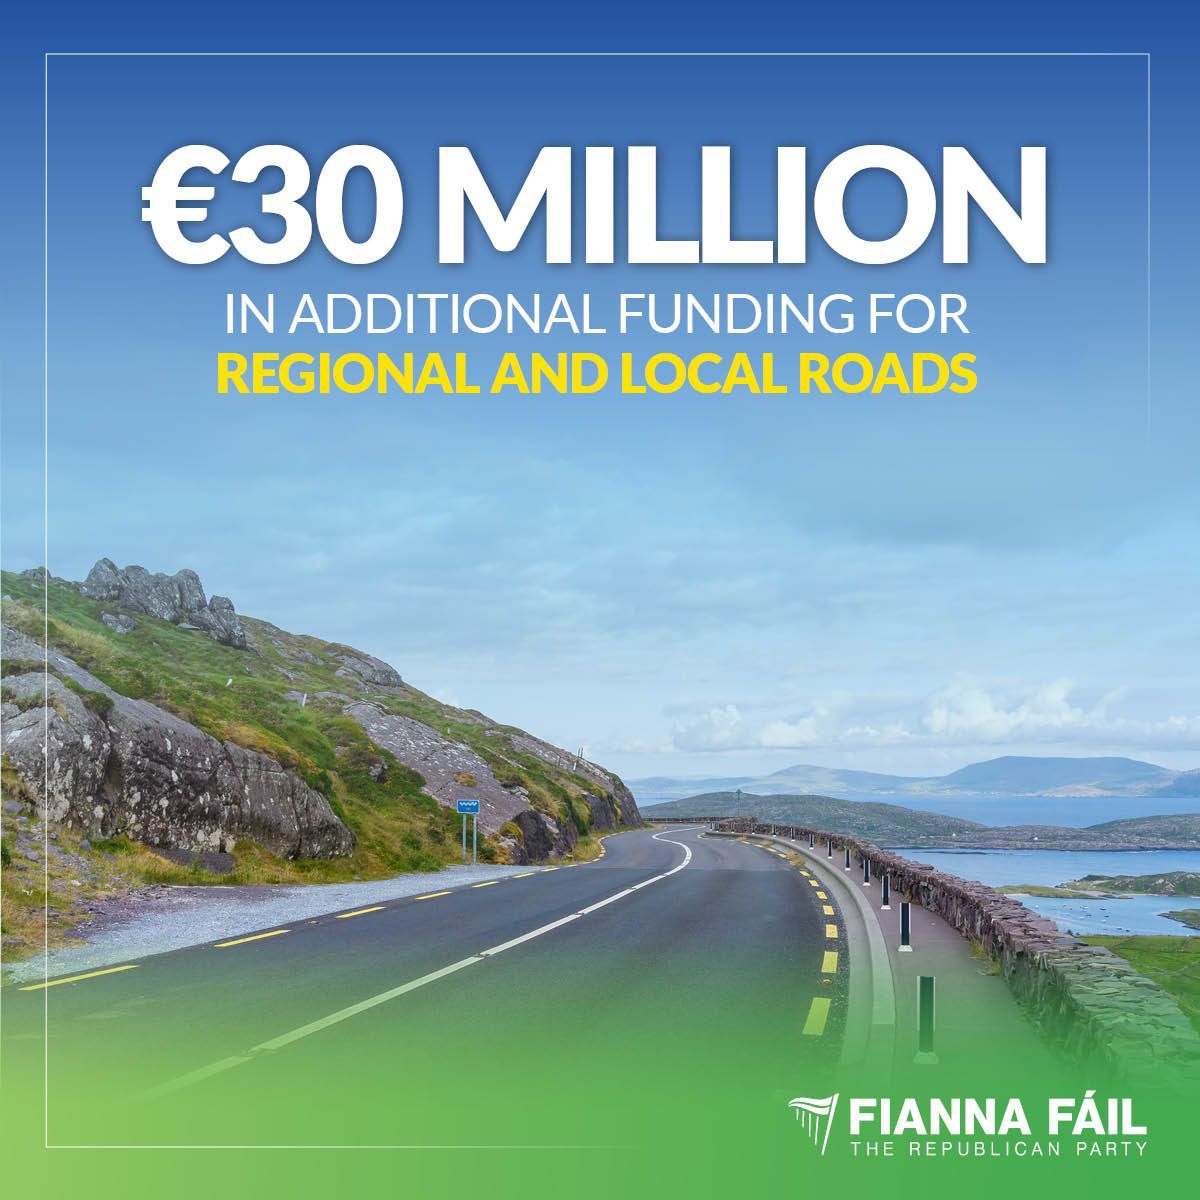 Minister @jackfchambers has announced €30 million in additional funding for roads following extremely wet months. This is to deal specifically with the impact of climate change. The emergency investment will assist in addressing the worst impacted areas of the road network.